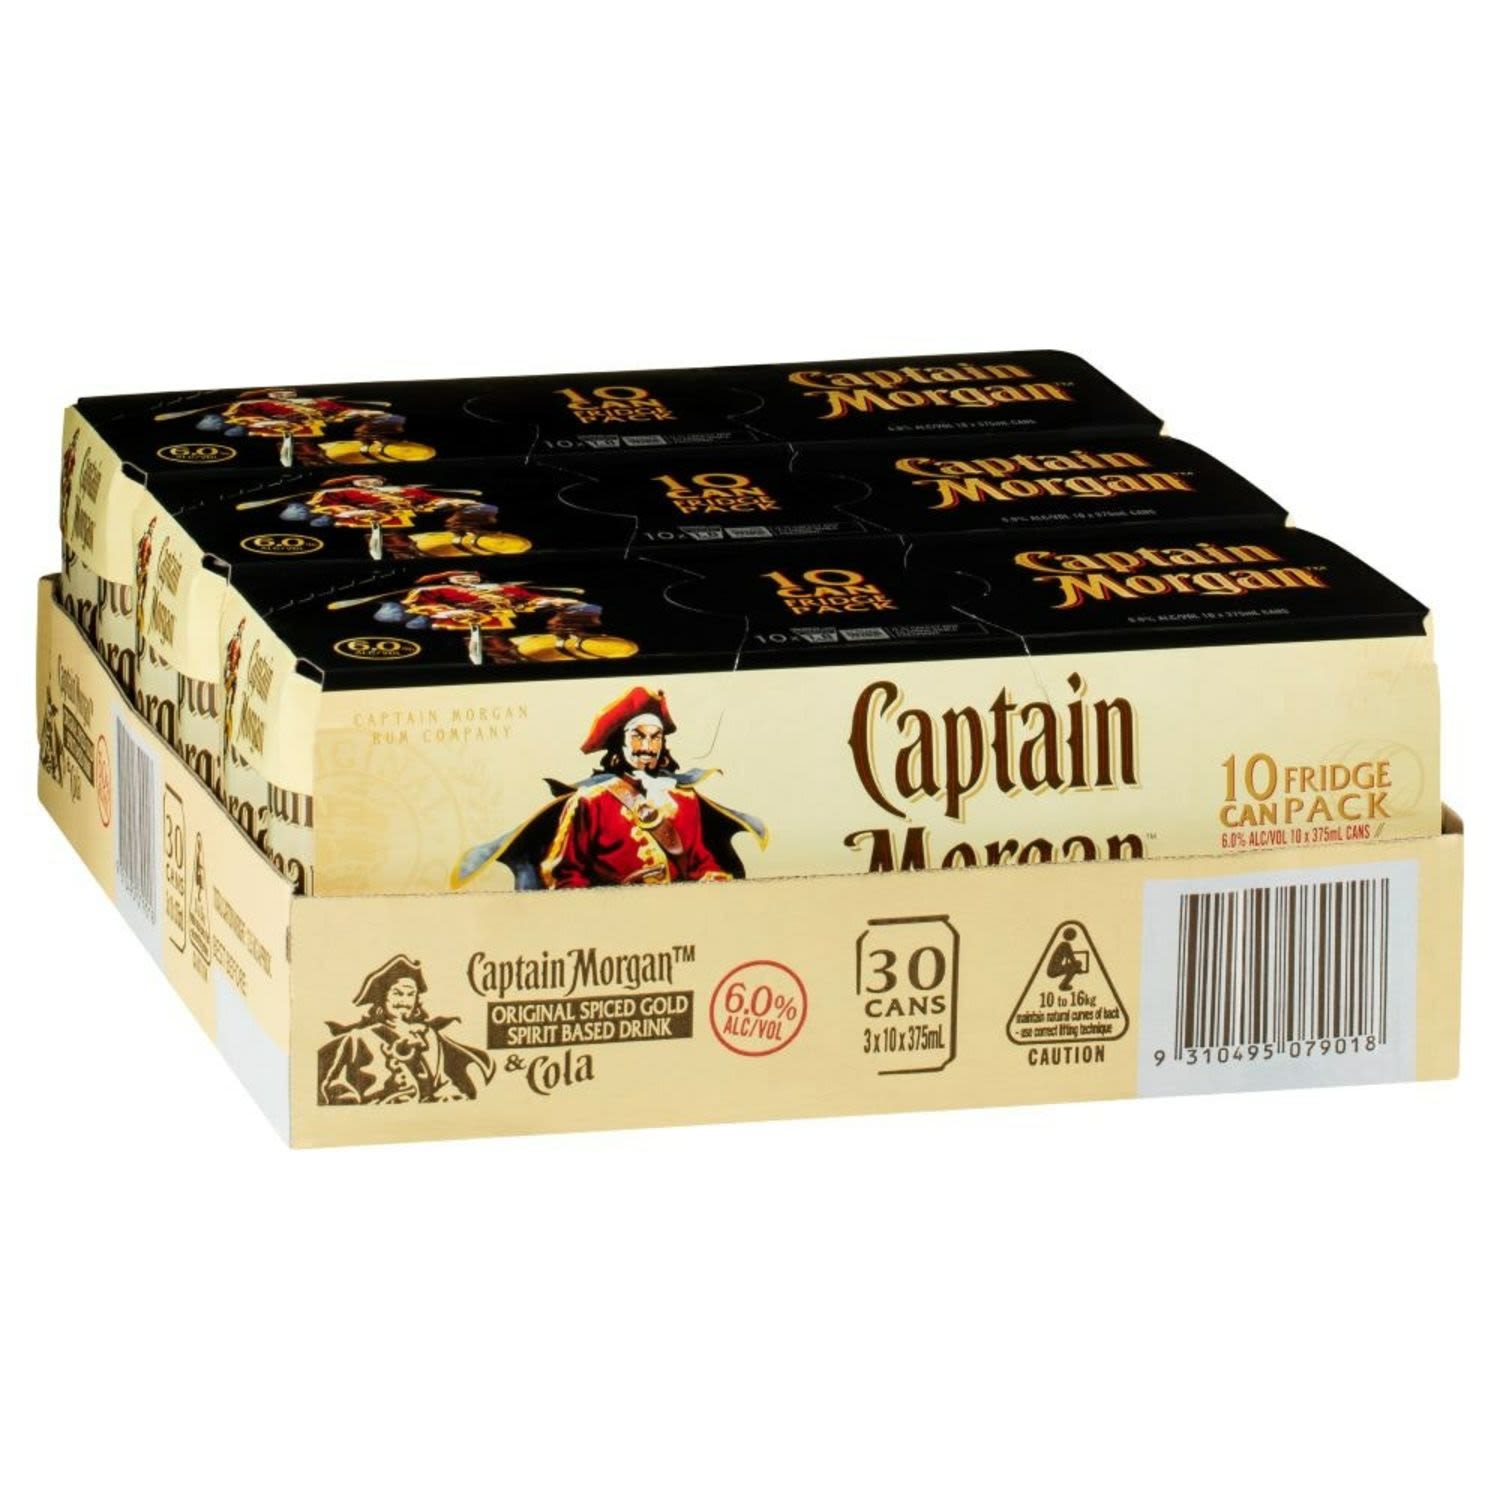 Captain Morgan Original Spiced Gold & Cola 6% Can 375mL 30 Pack